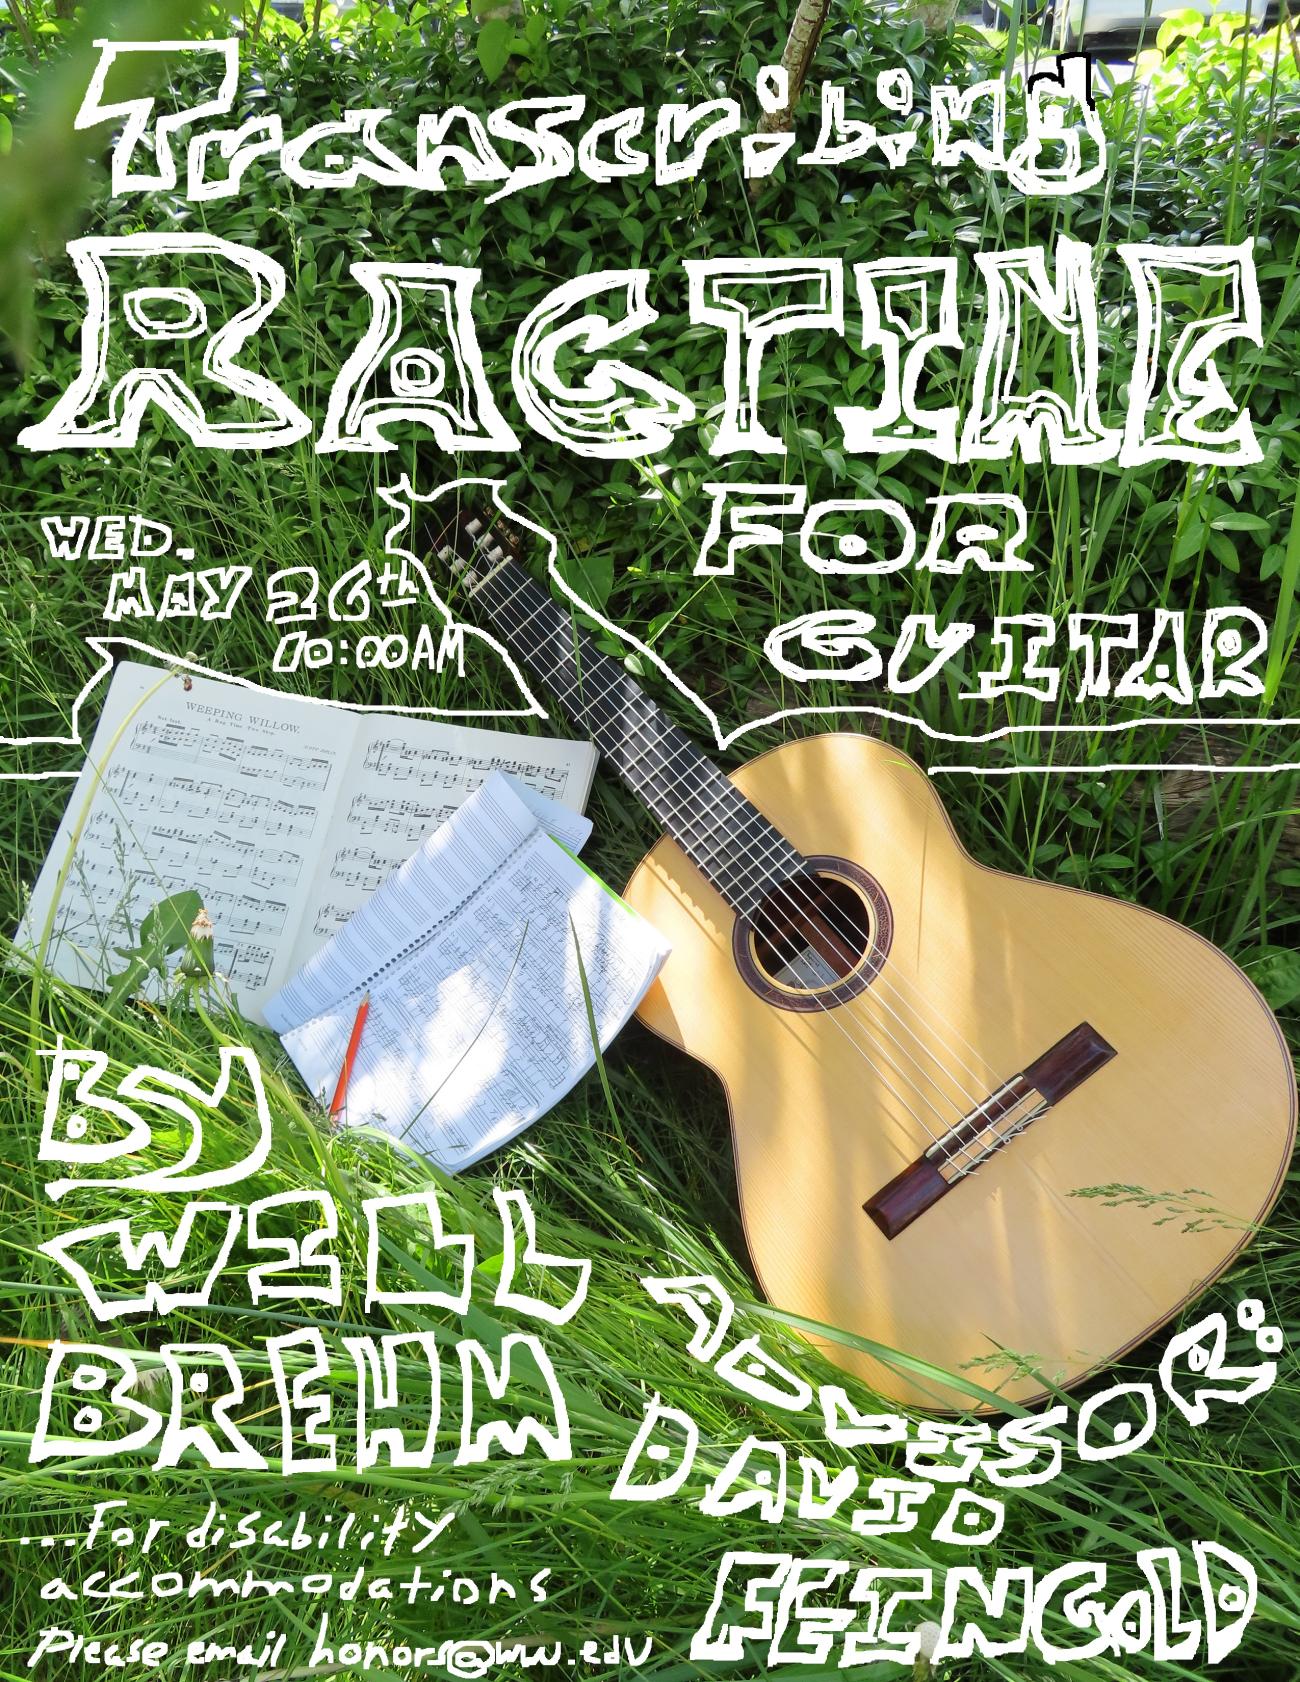 A photo of a guitar lying in tall grass next to two music books and a pencil. One book is open to sheet music for 'Weeping Willow', and the other contains handwritten music transcription. Digitally handwritten white text on the grass reads: "Transcribing Ragtime for Guitar. Wednesday, May 26th, 10:00AM. By Will Brehm. Advisor: David Feingold. For disability accommodations please email honors@wwu.edu".